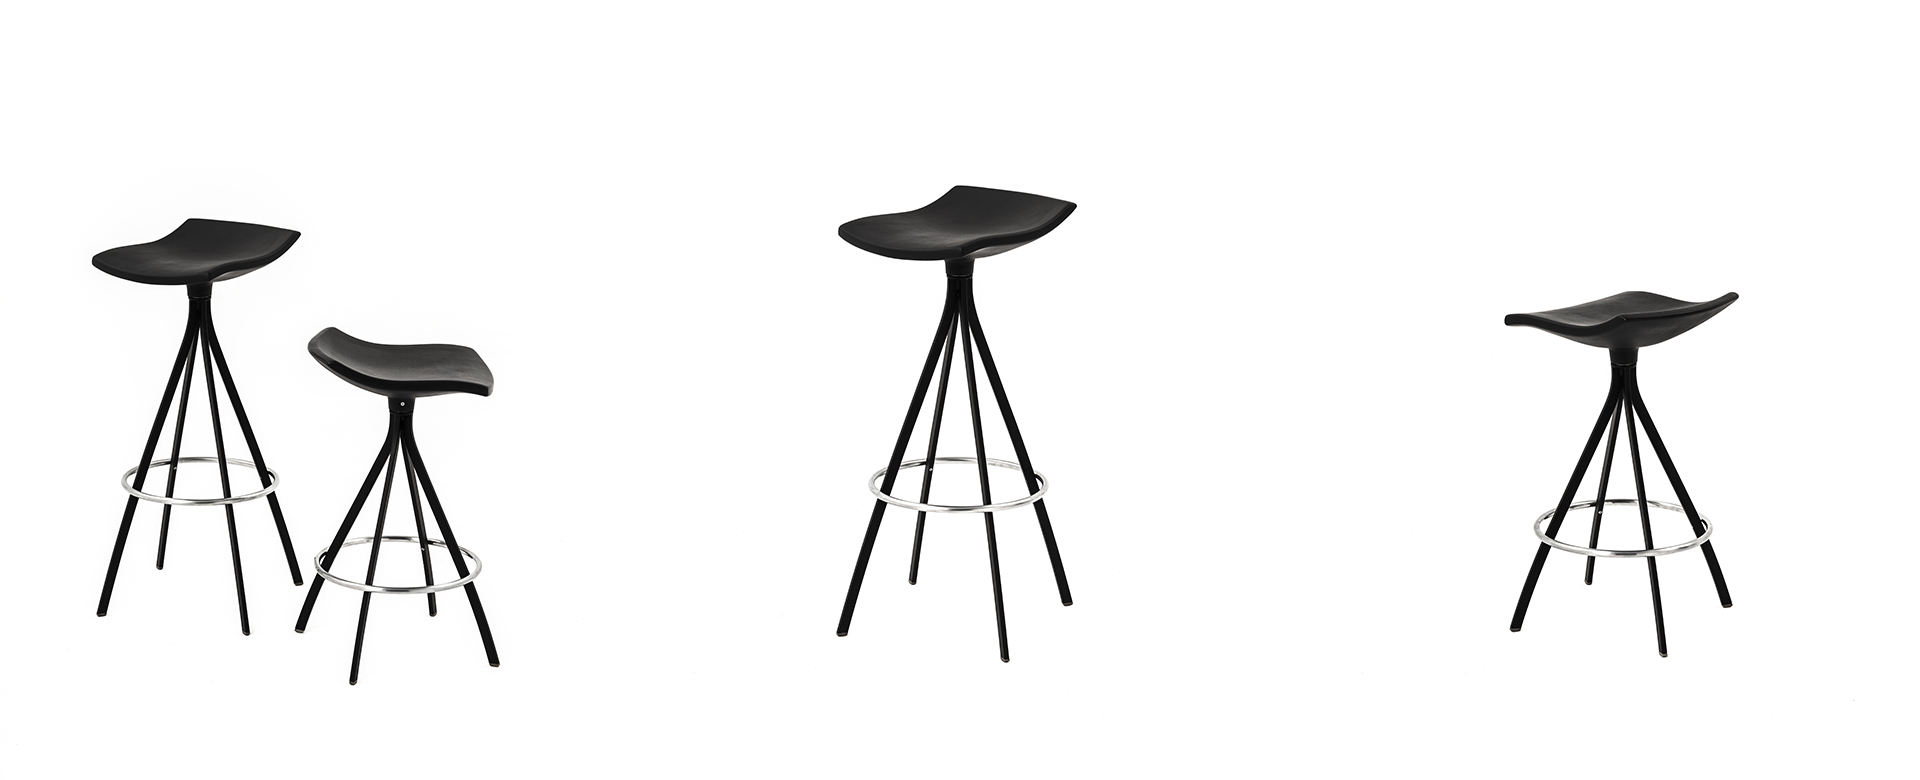 GINLET Stools